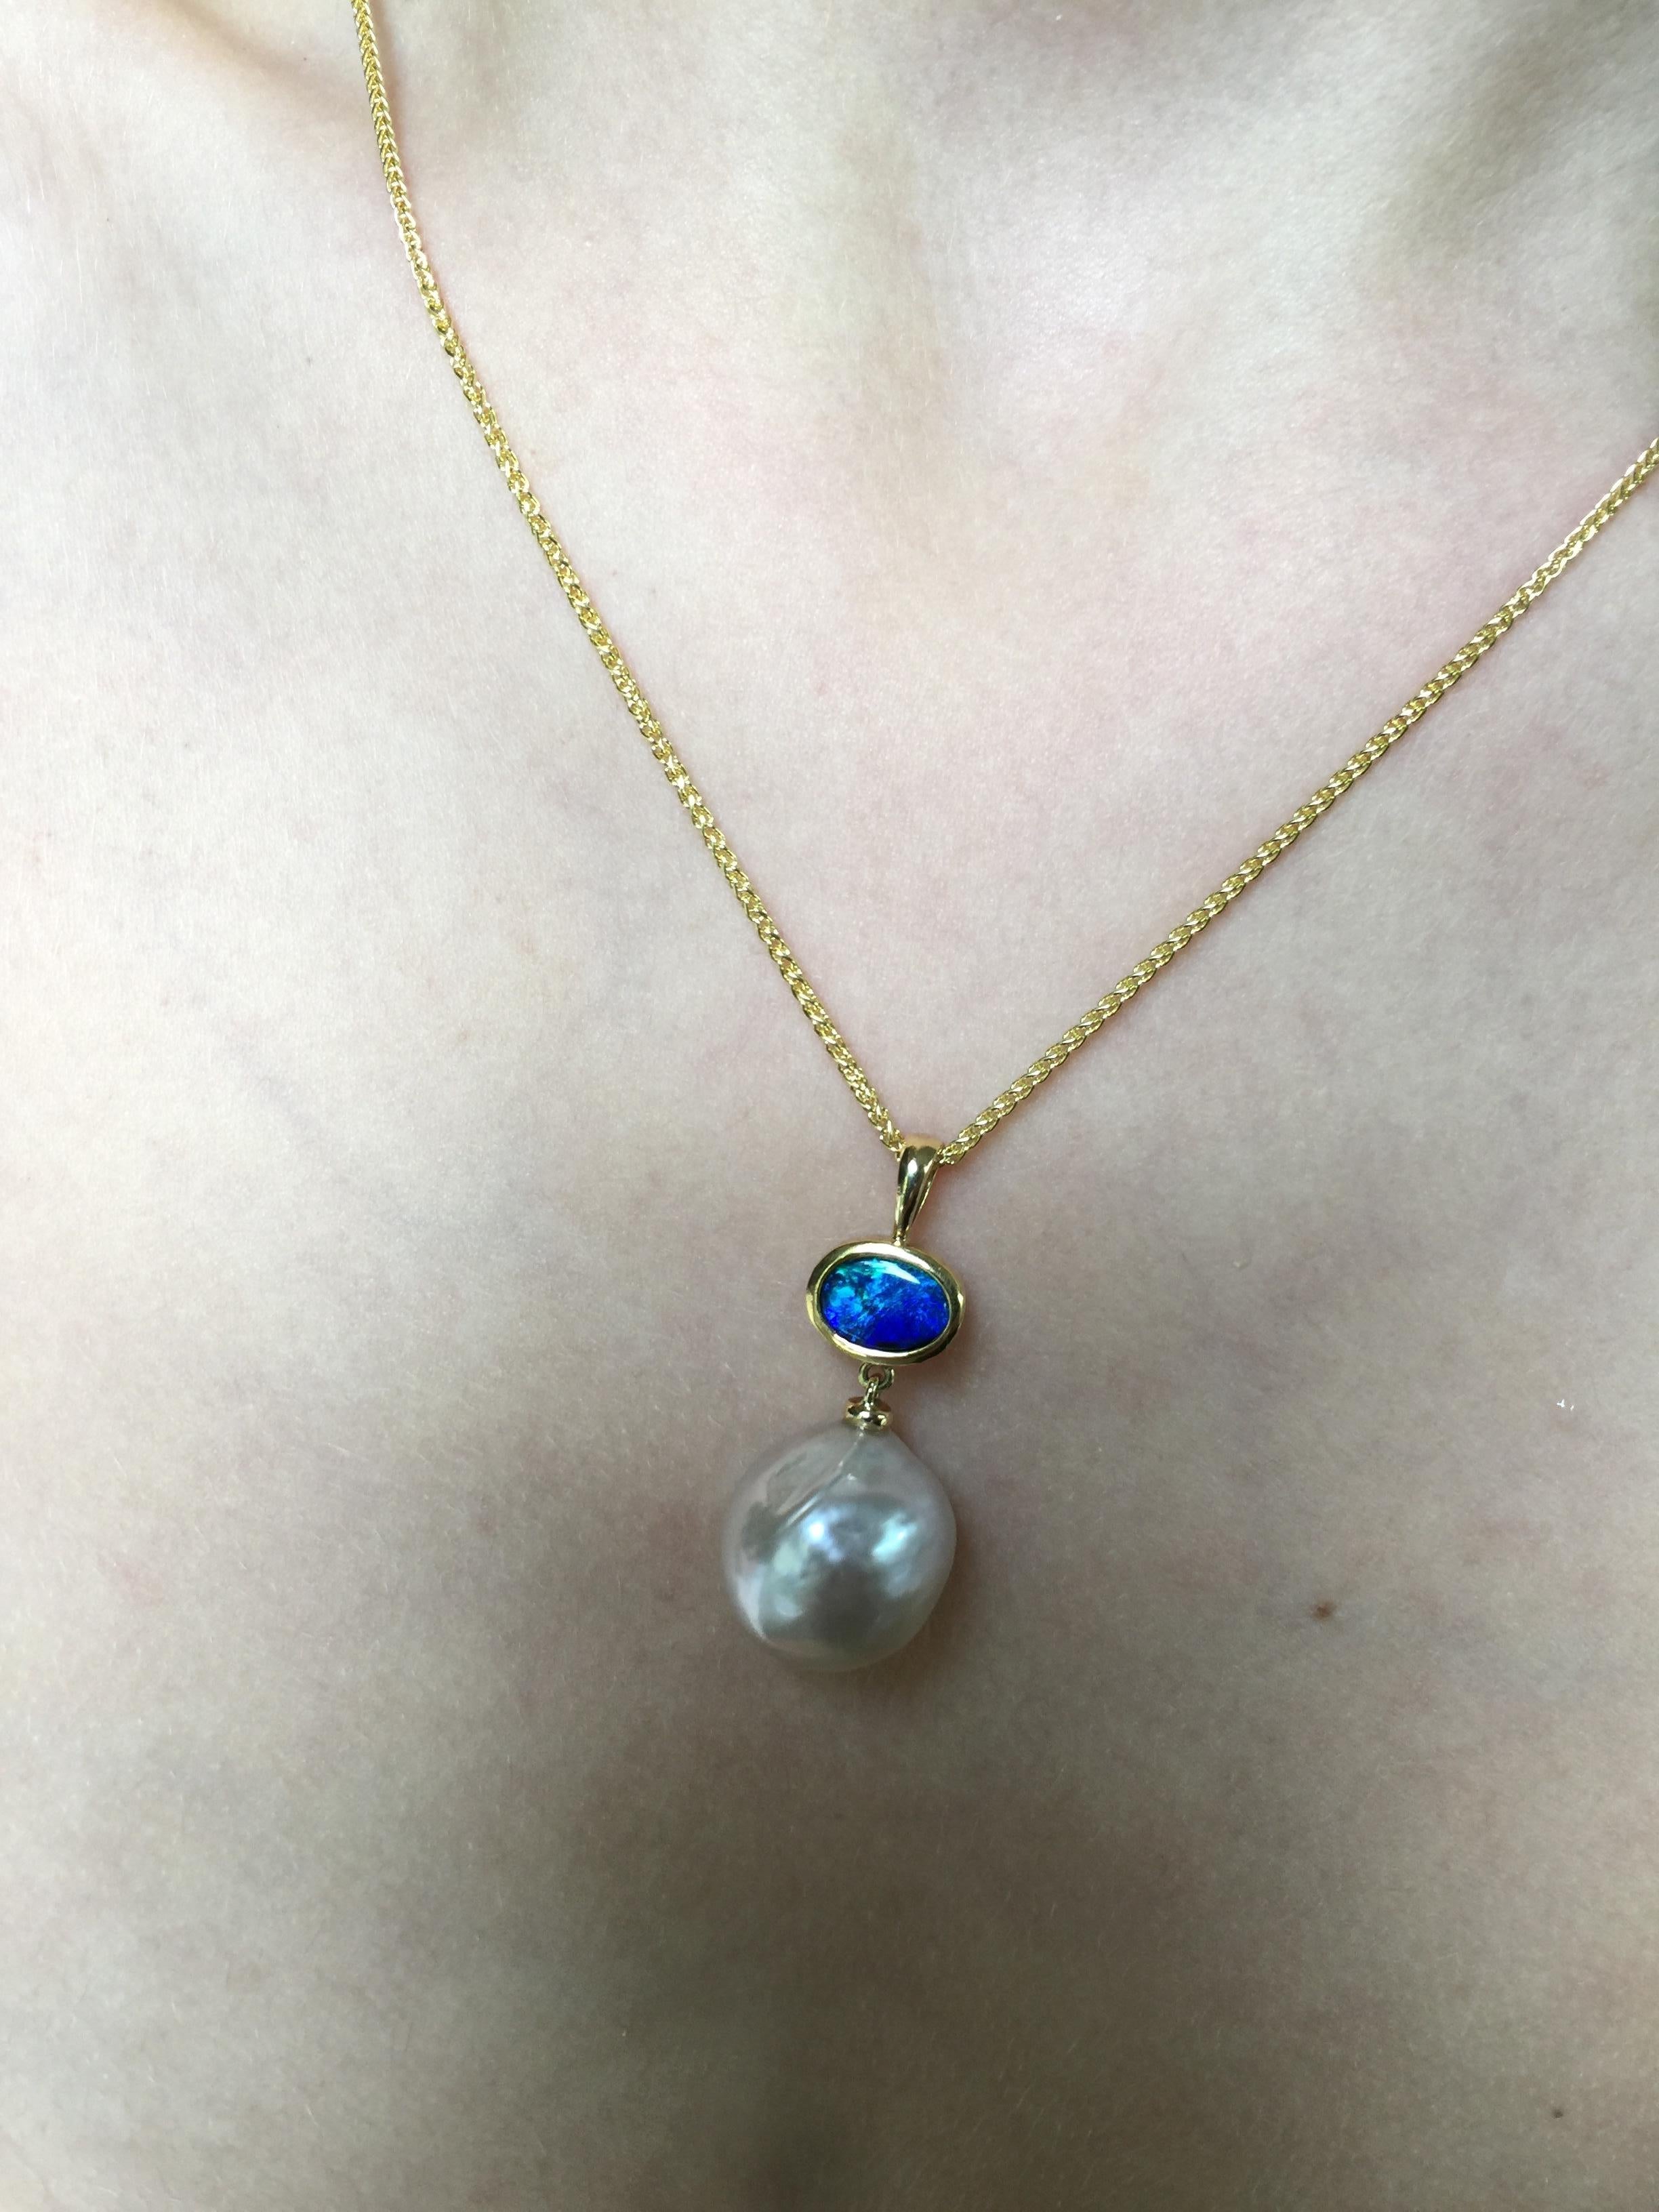 Women's or Men's 13 mm Kasumi Pearl, Solid Australian Opal and 18 Karat Gold Pendant Necklace